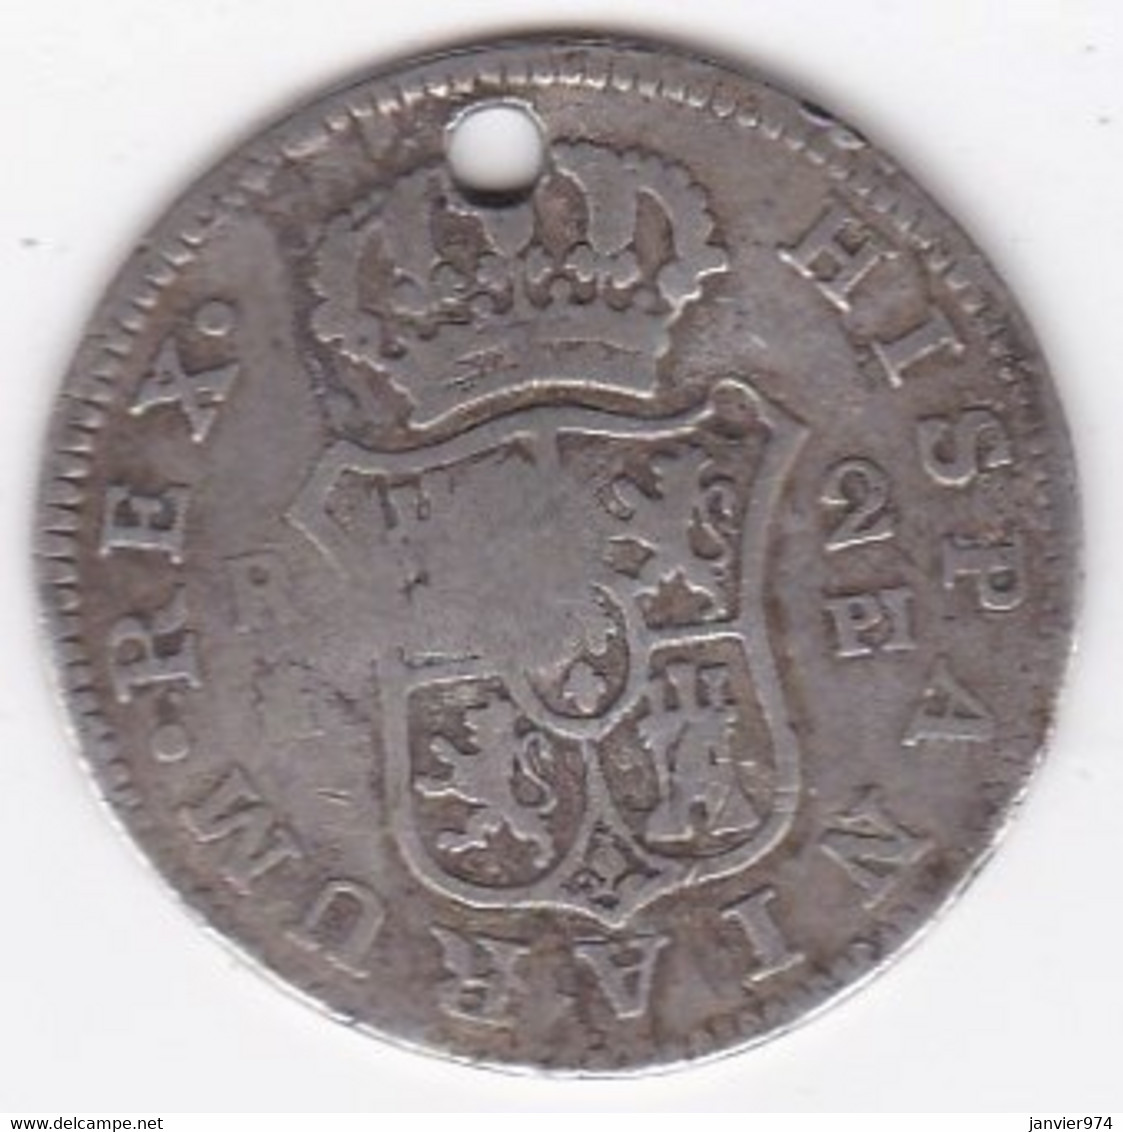 2 Reales 1773 Madrid Charles III Avec Une Contremarque (contramarca) à Identifier , En Argent - First Minting